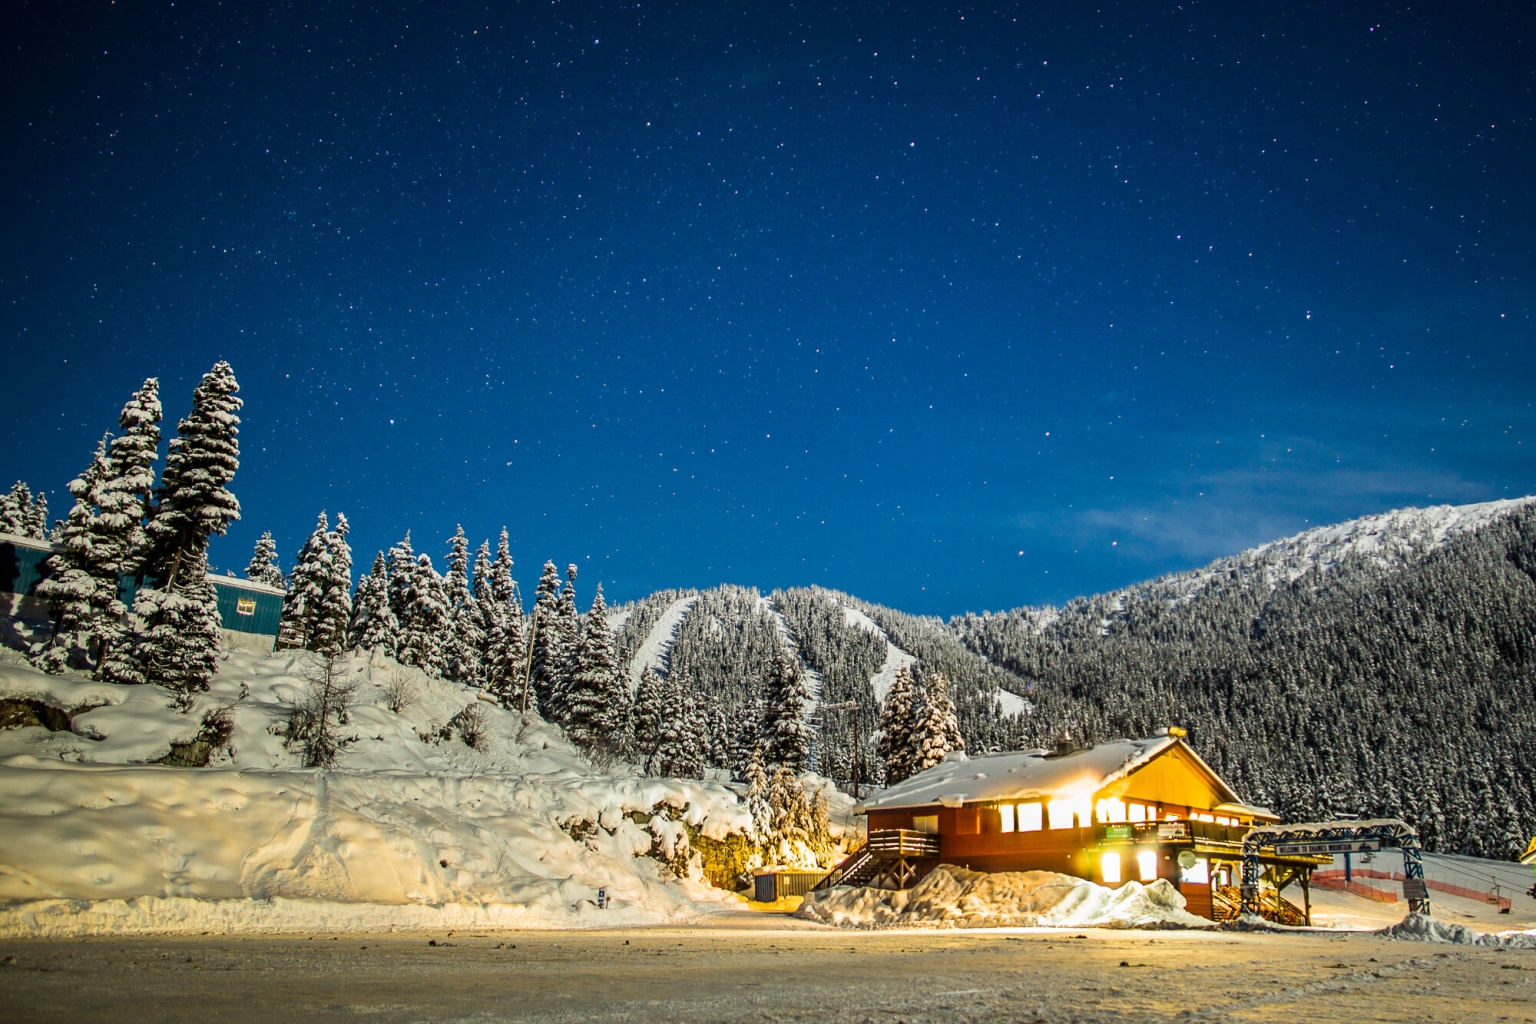 A wooden lodge sits in a gorgeous snowy setting with trees and mountains behind. It's dusk, and the lights are on inside the lodge.